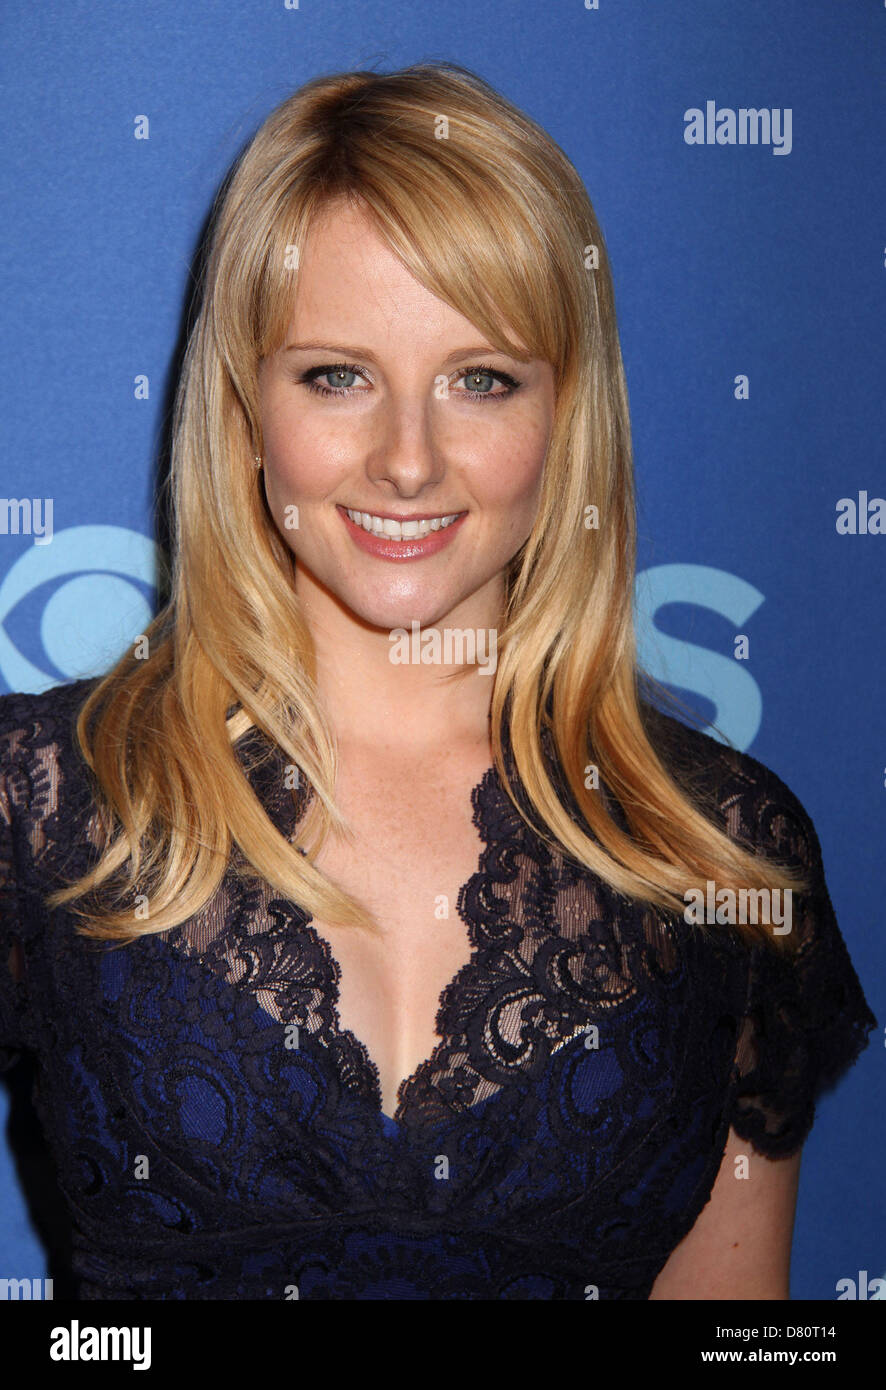 New York, USA. 15th May 2013. Actor MELISSA RAUCH attends the 2013 CBS ...